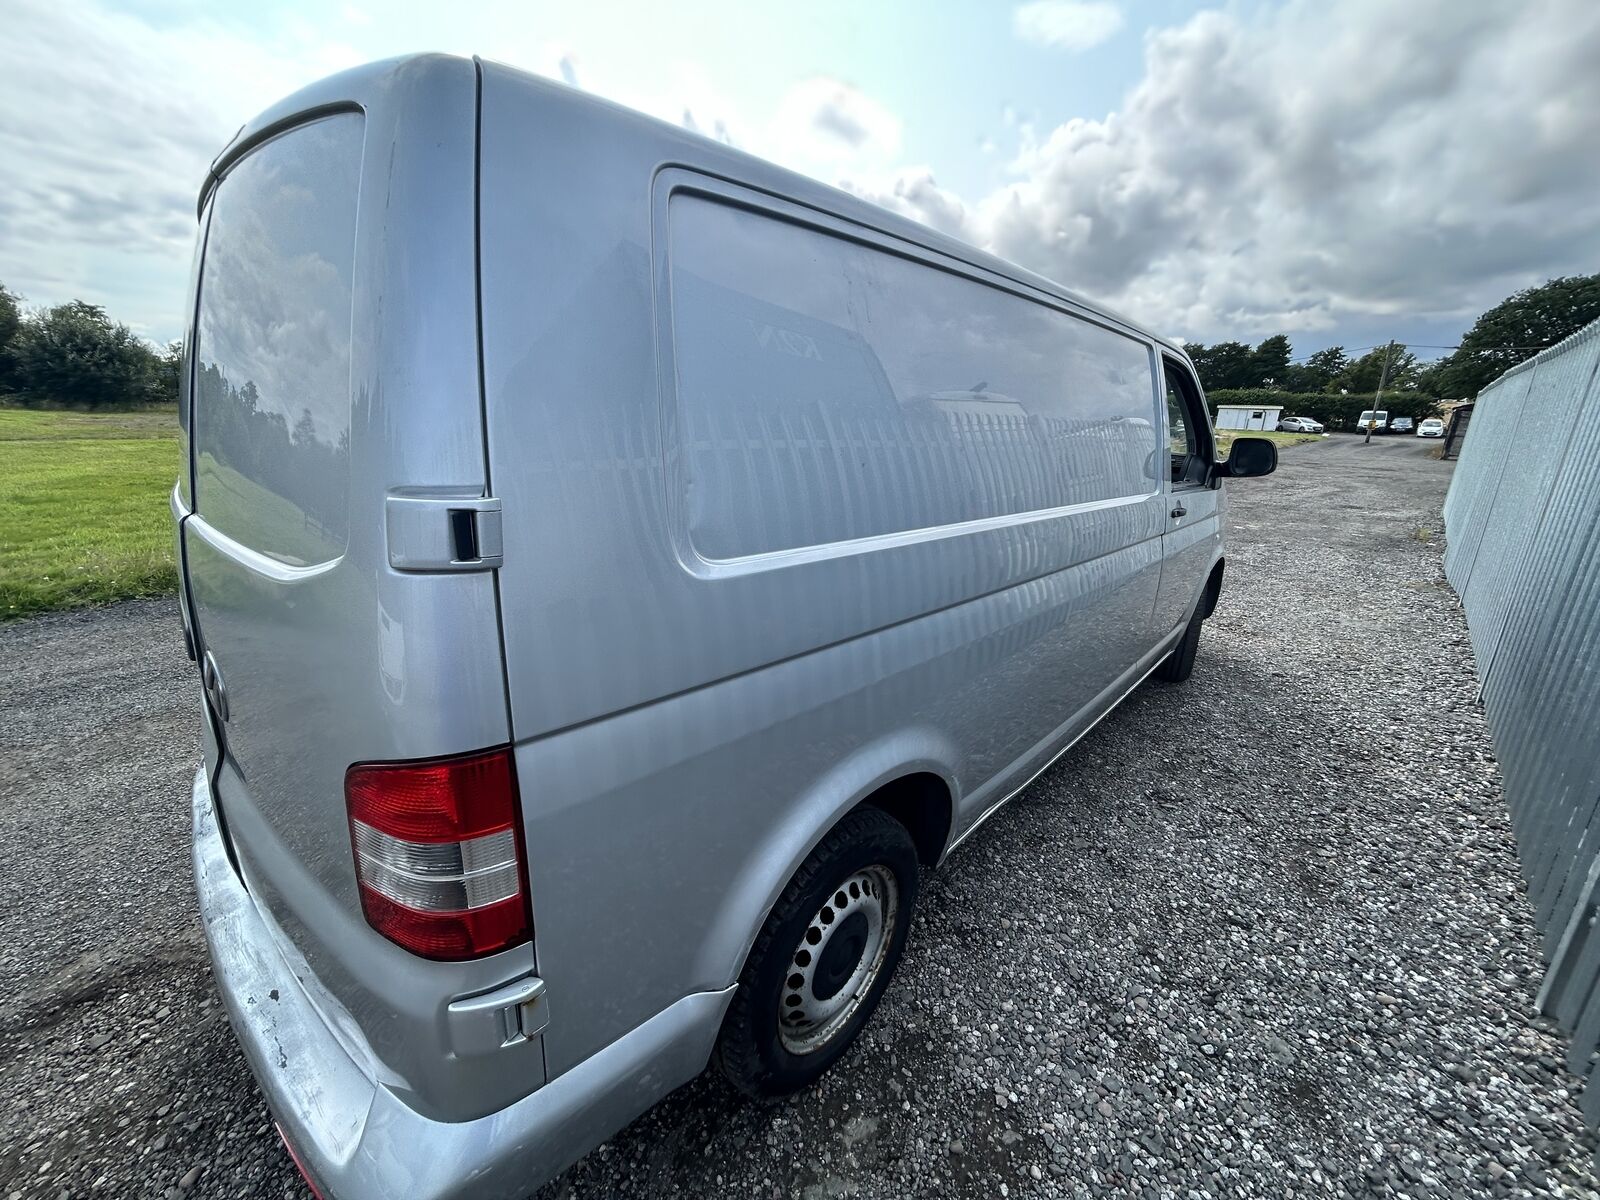 Bid on PANEL VAN IN NEED: 63 PLATE VW TRANSPORTER STARTLINE - NO VAT ON HAMMER - 140K MILES- Buy &amp; Sell on Auction with EAMA Group